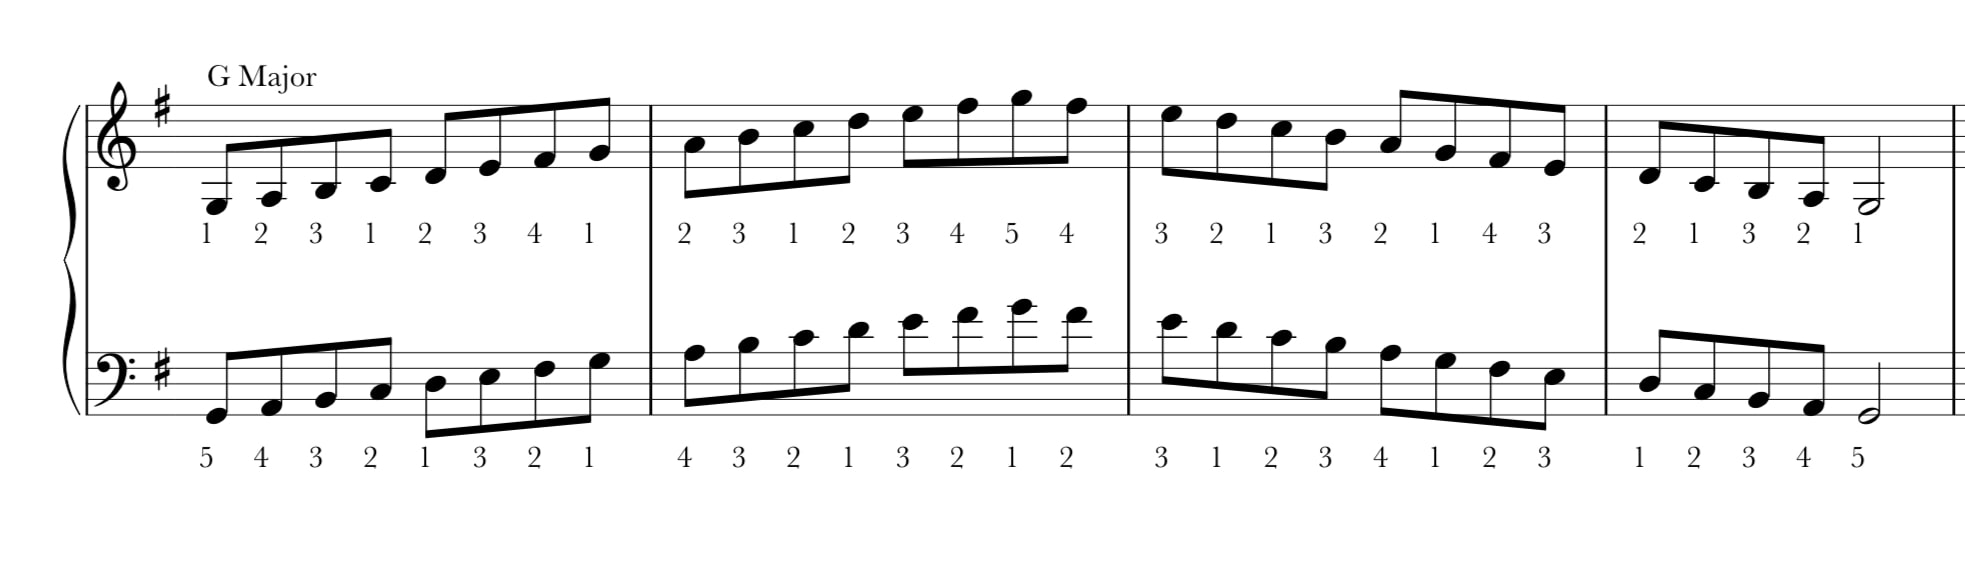 Notation for G major scale showing fingering